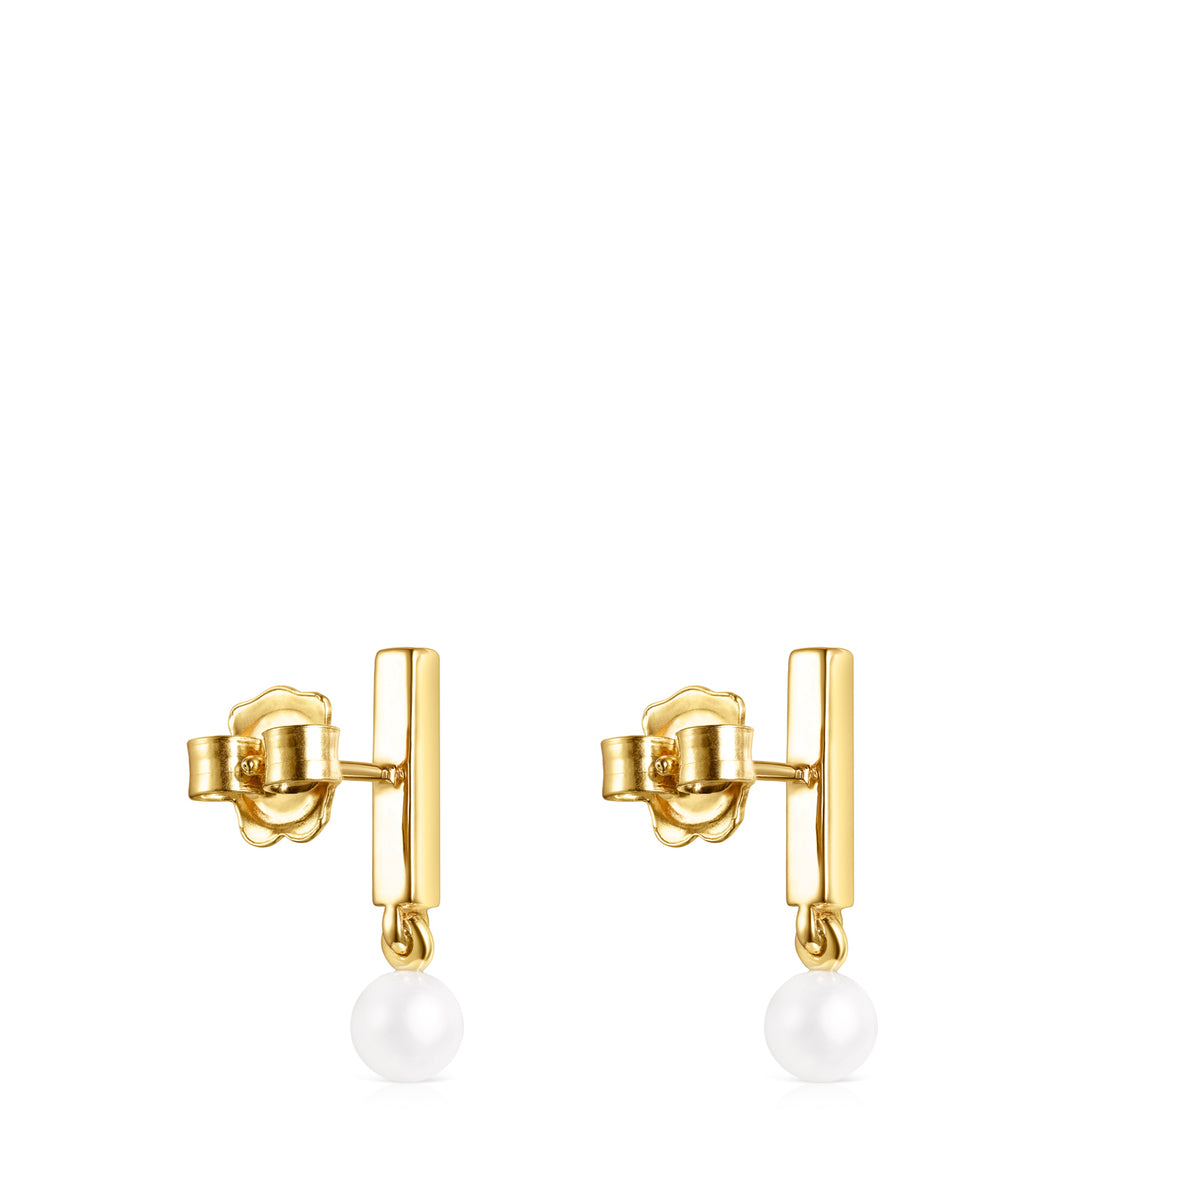 Tous Nocturne bar Earrings in Gold Vermeil with Diamonds and Pearl 918 –